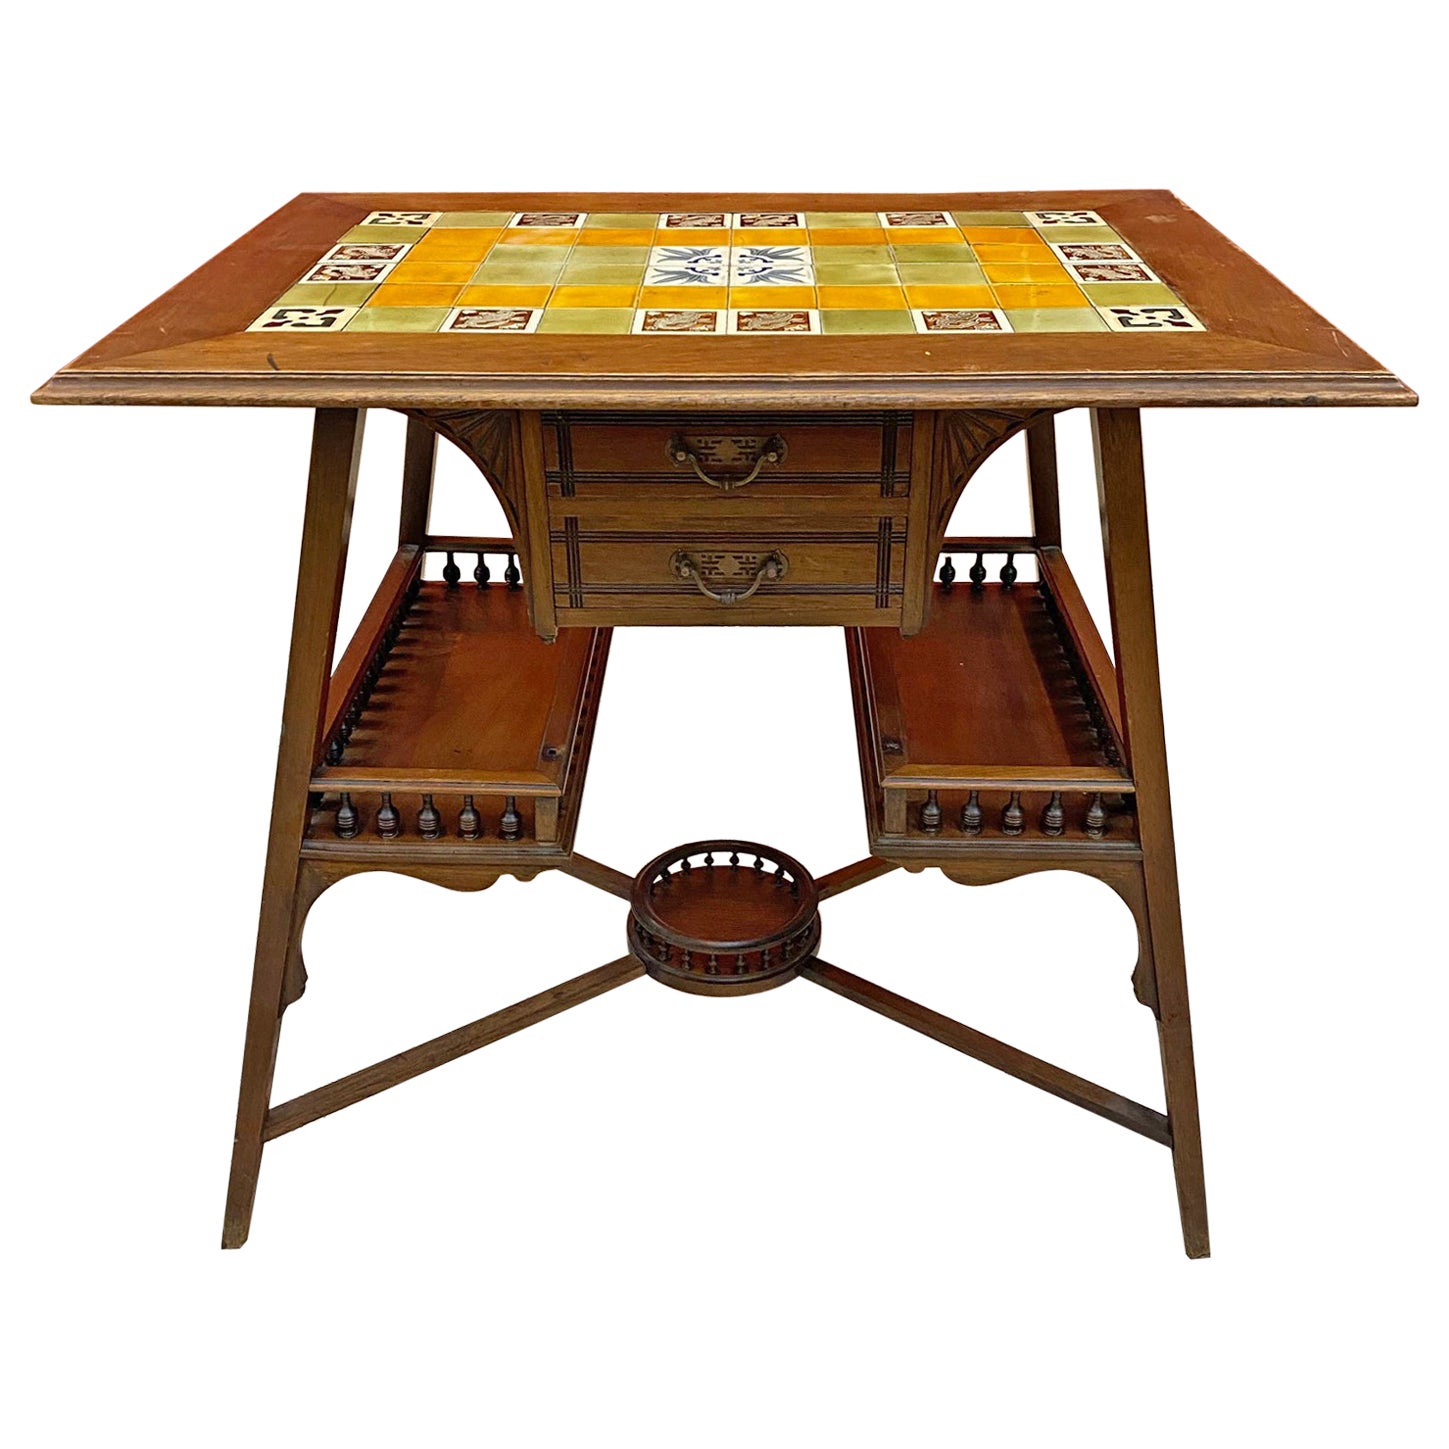 Art Nouveau Side Table in Oak, Top Covered with Ceramics